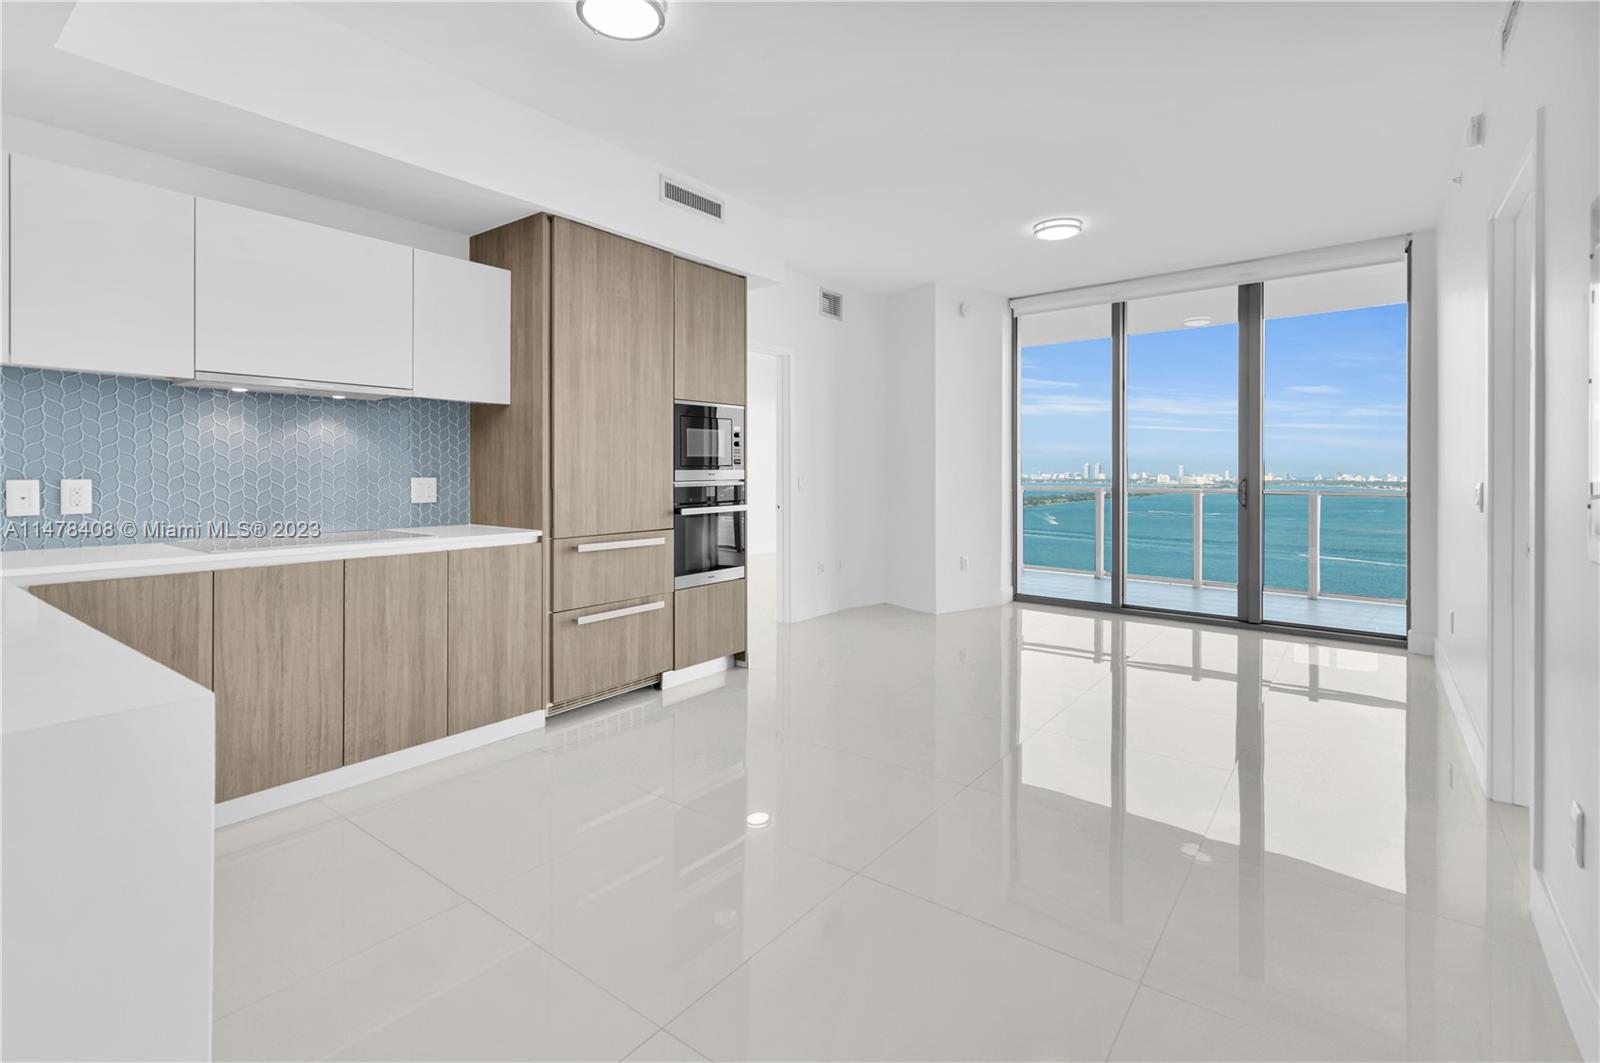 Photo 1 of Biscayne Beach Biscayne Apt 2205 in Miami - MLS A11478408